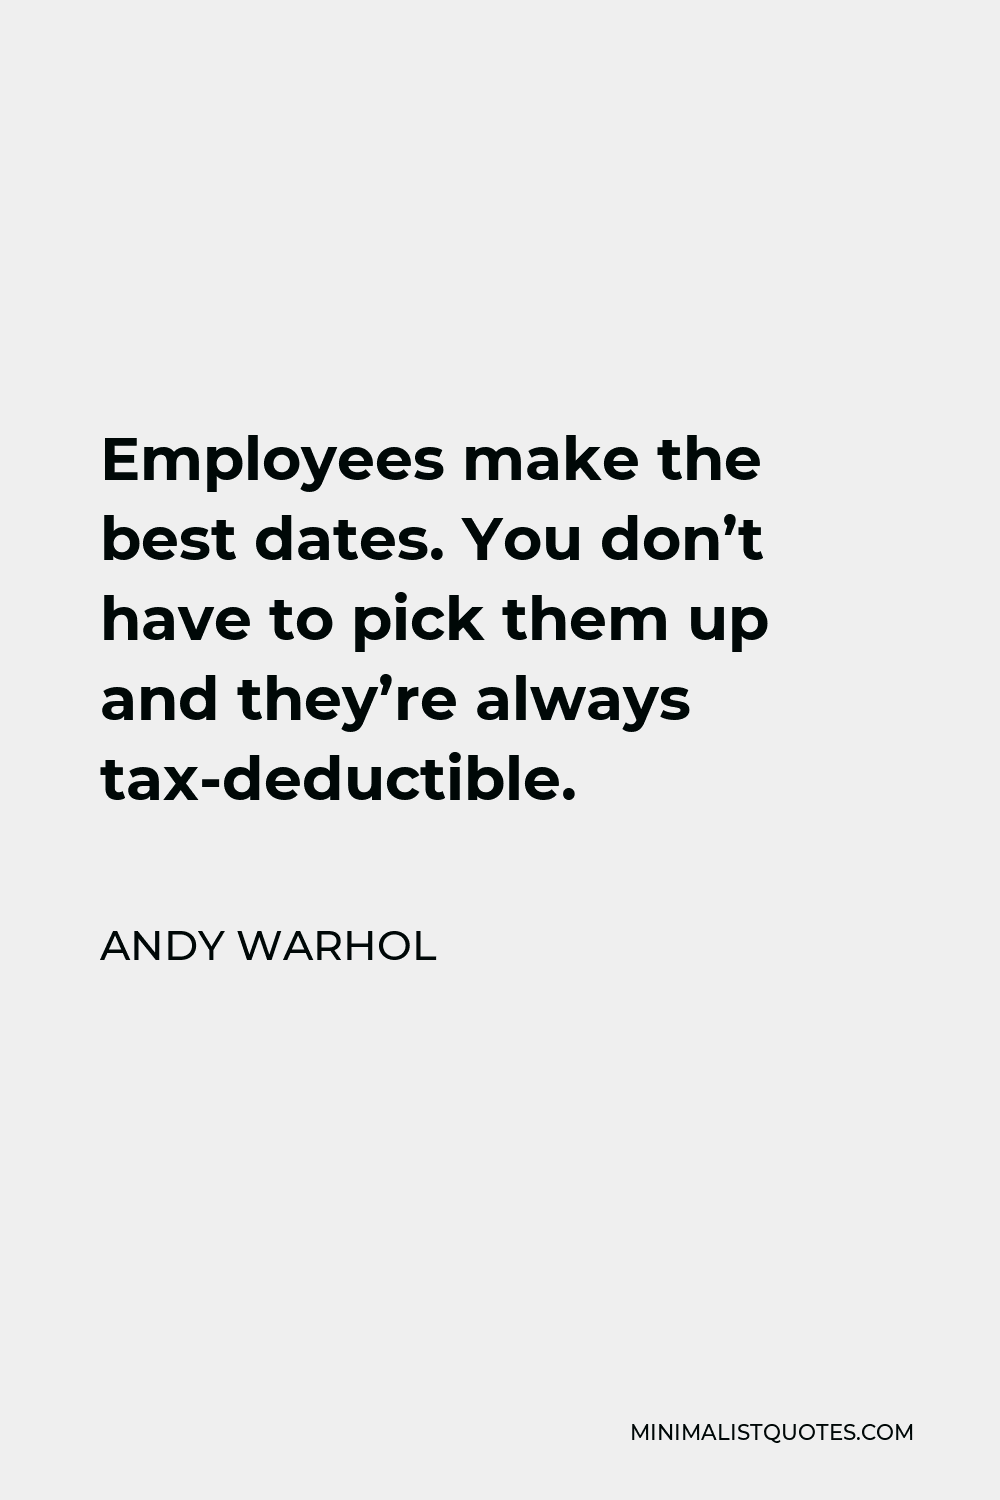 Andy Warhol Quote - Employees make the best dates. You don’t have to pick them up and they’re always tax-deductible.